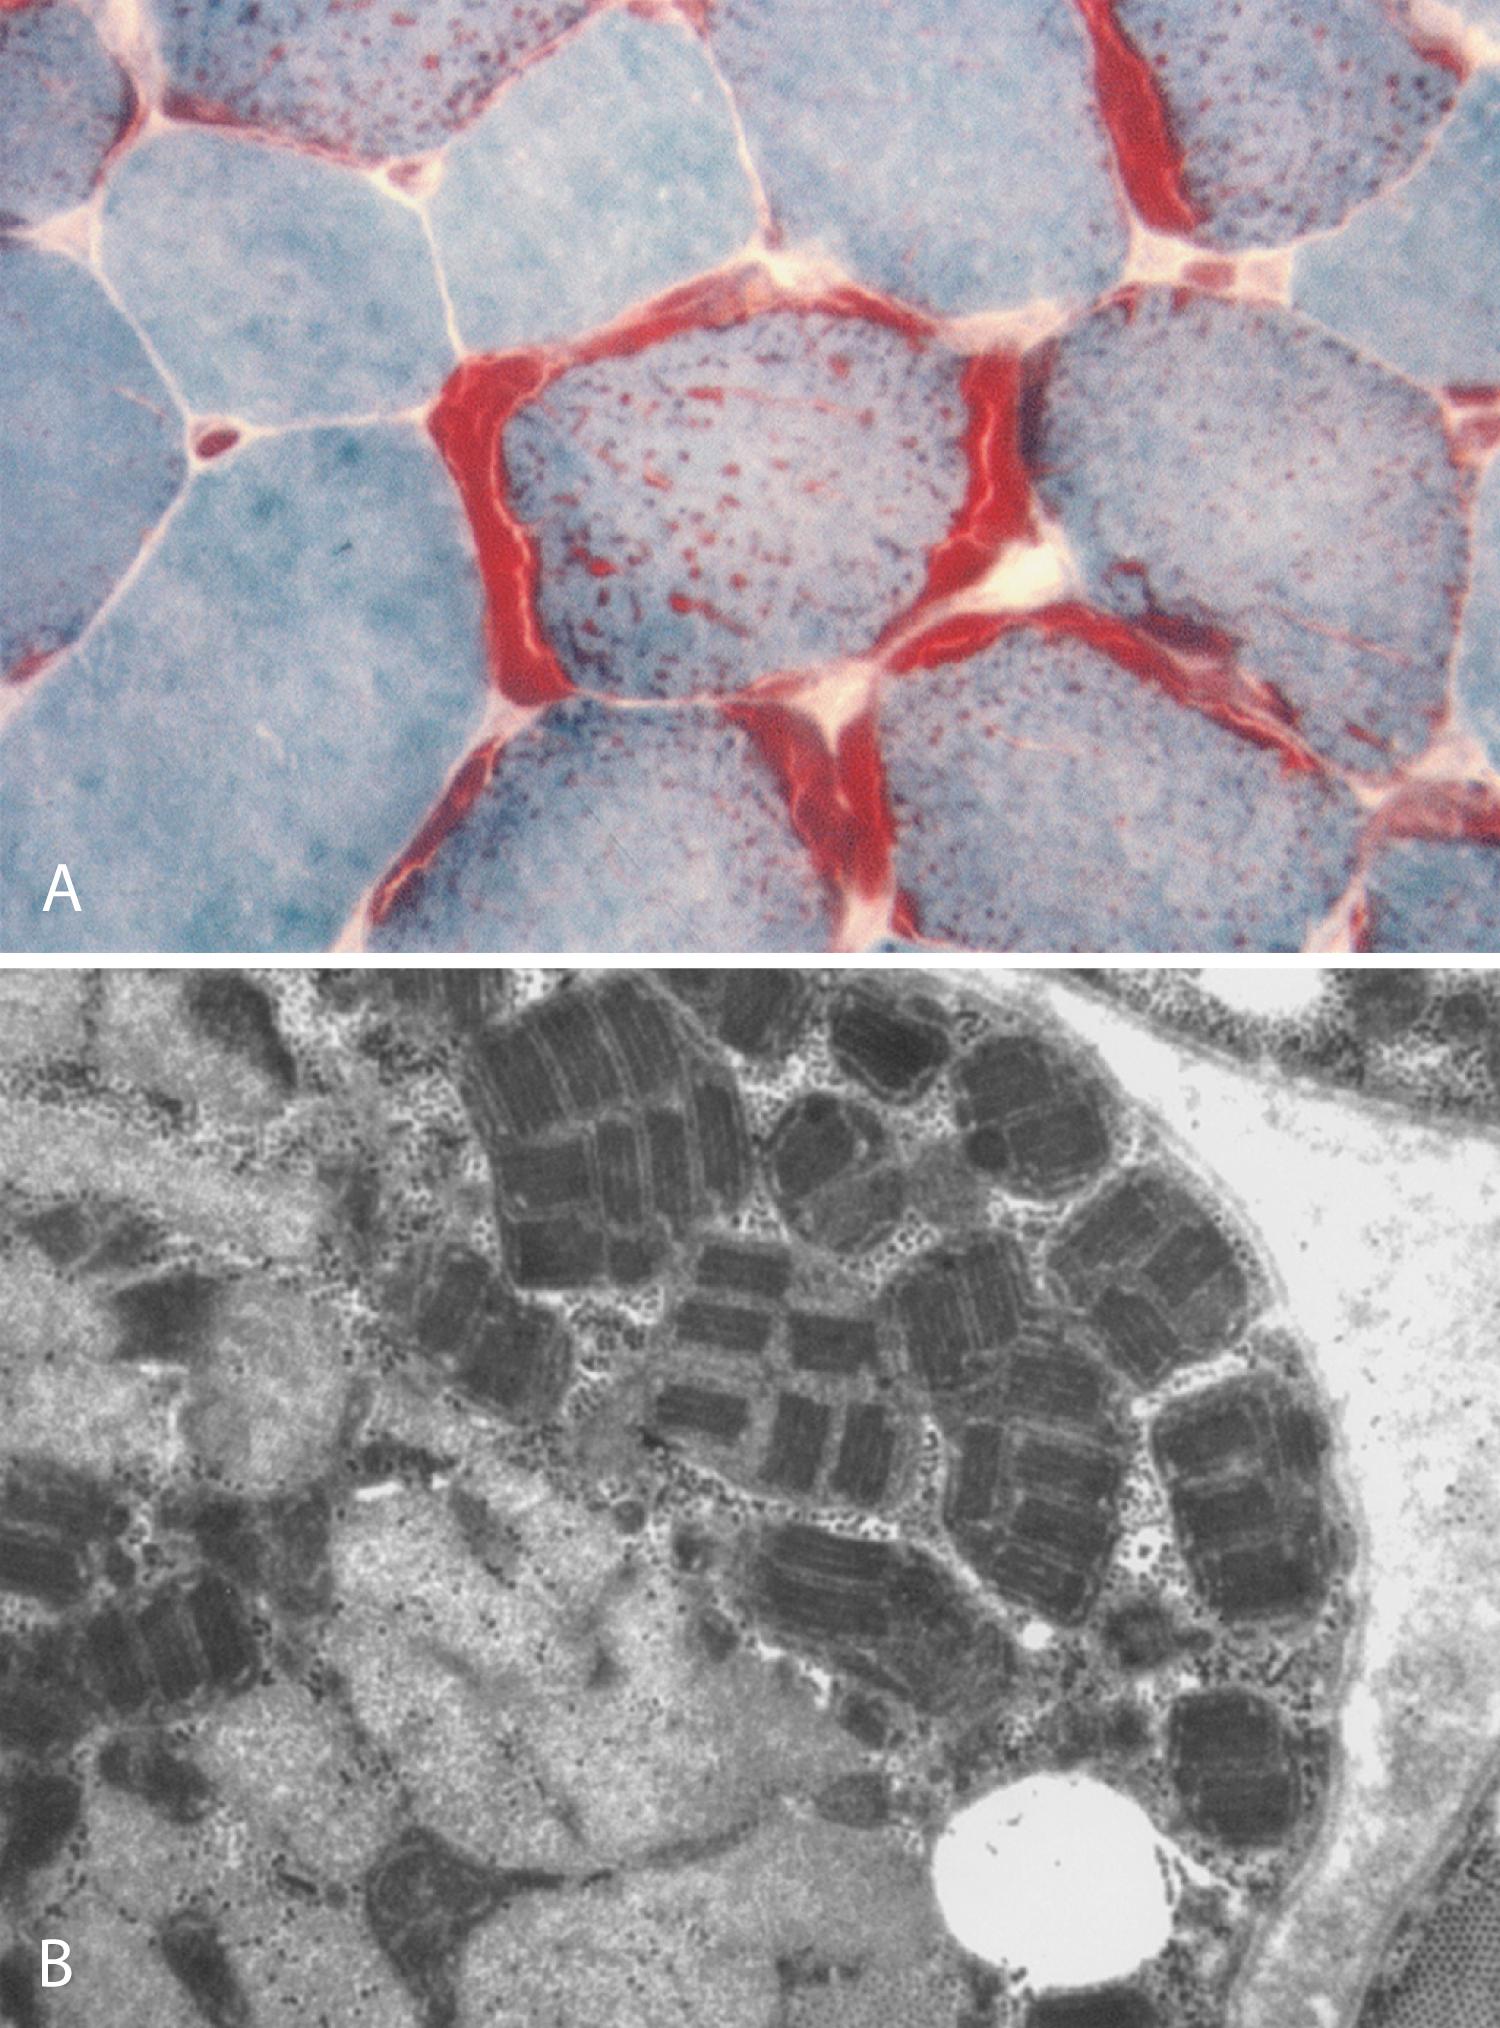 Fig. 93.2, A , Modified Gomori trichrome section of a biopsy showing ragged-red muscle fibers. Increased mitochondrial staining in the subsarcolemmal and intermyofibrillar regions of the muscle fibers imparts the ragged-red appearance. B , Mitochondrial myopathy. Electron micrograph of a part of the muscle fiber showing mitochondrial proliferation; many mitochondria contain typical “parking lot” paracrystalline inclusions.